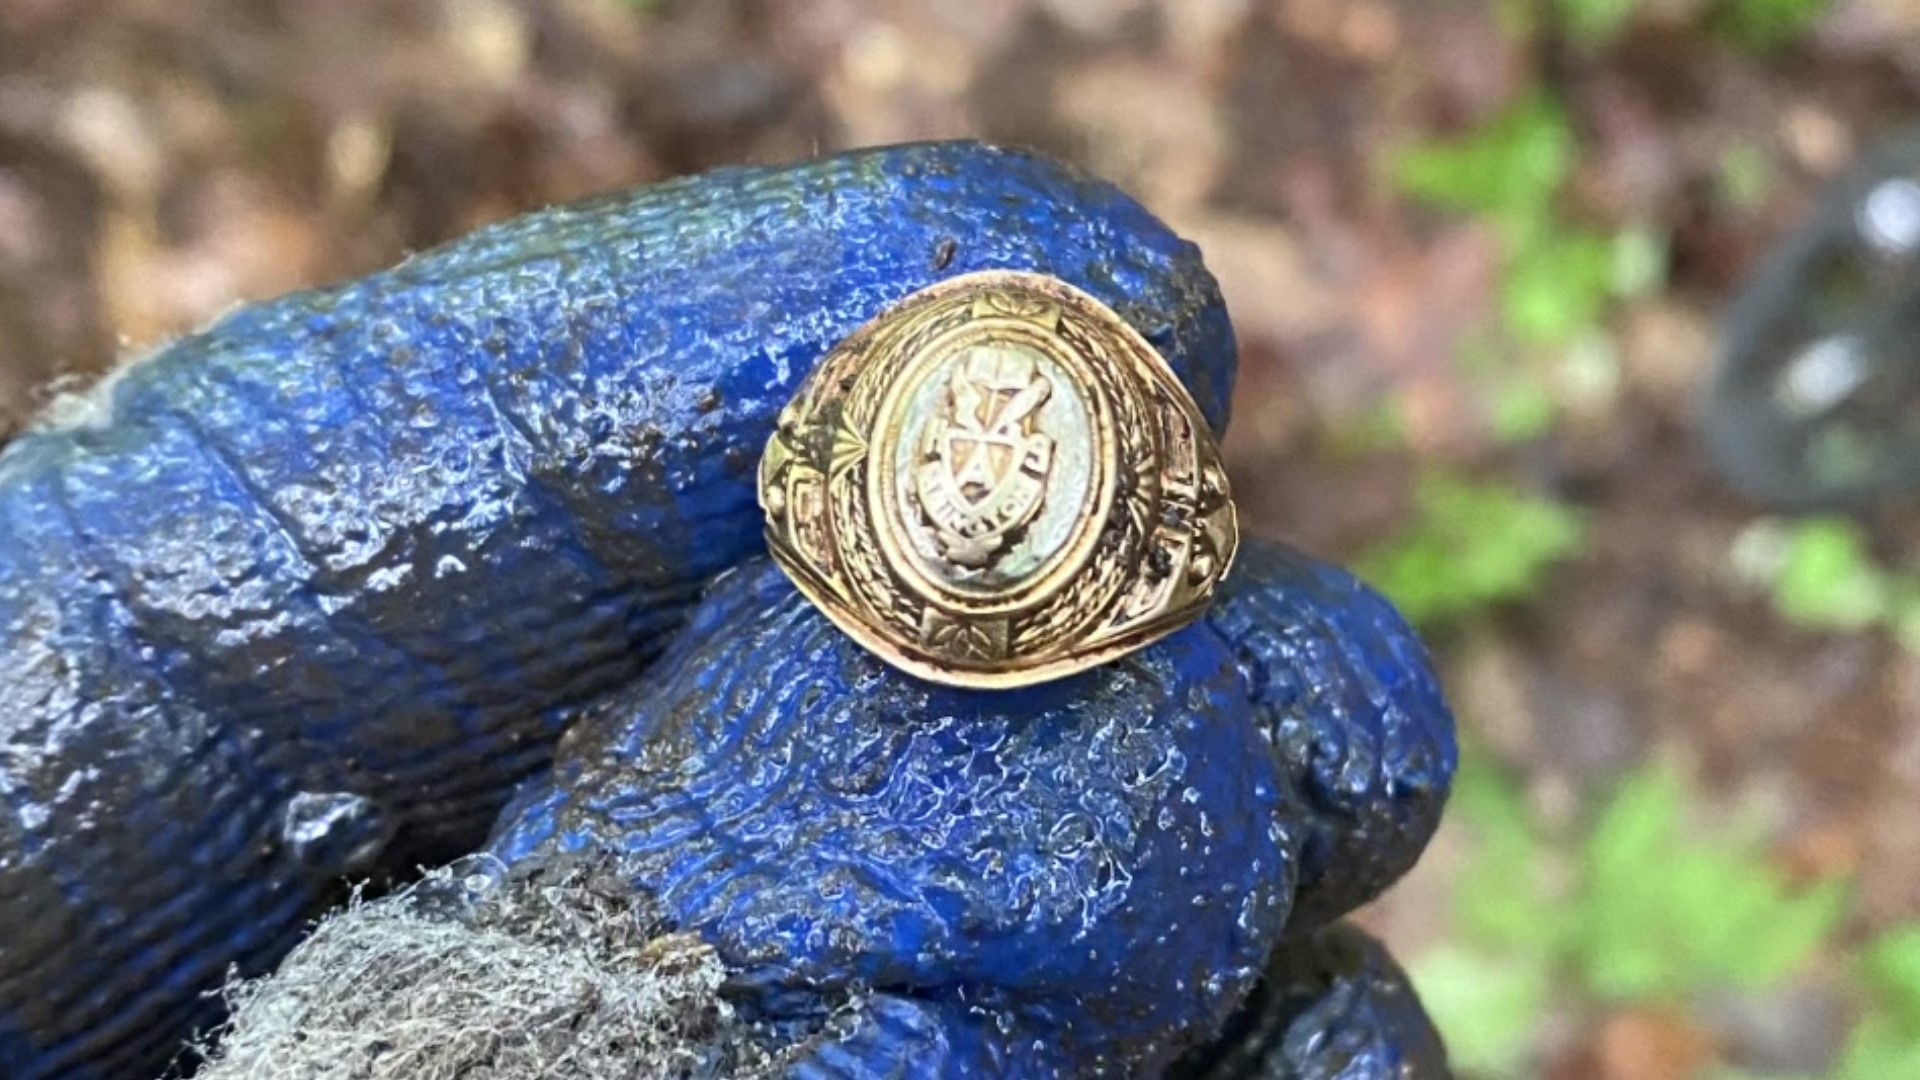 A pair of friends made a discovery while they were out metal detecting in Wyoming County—a class ring from 1963.